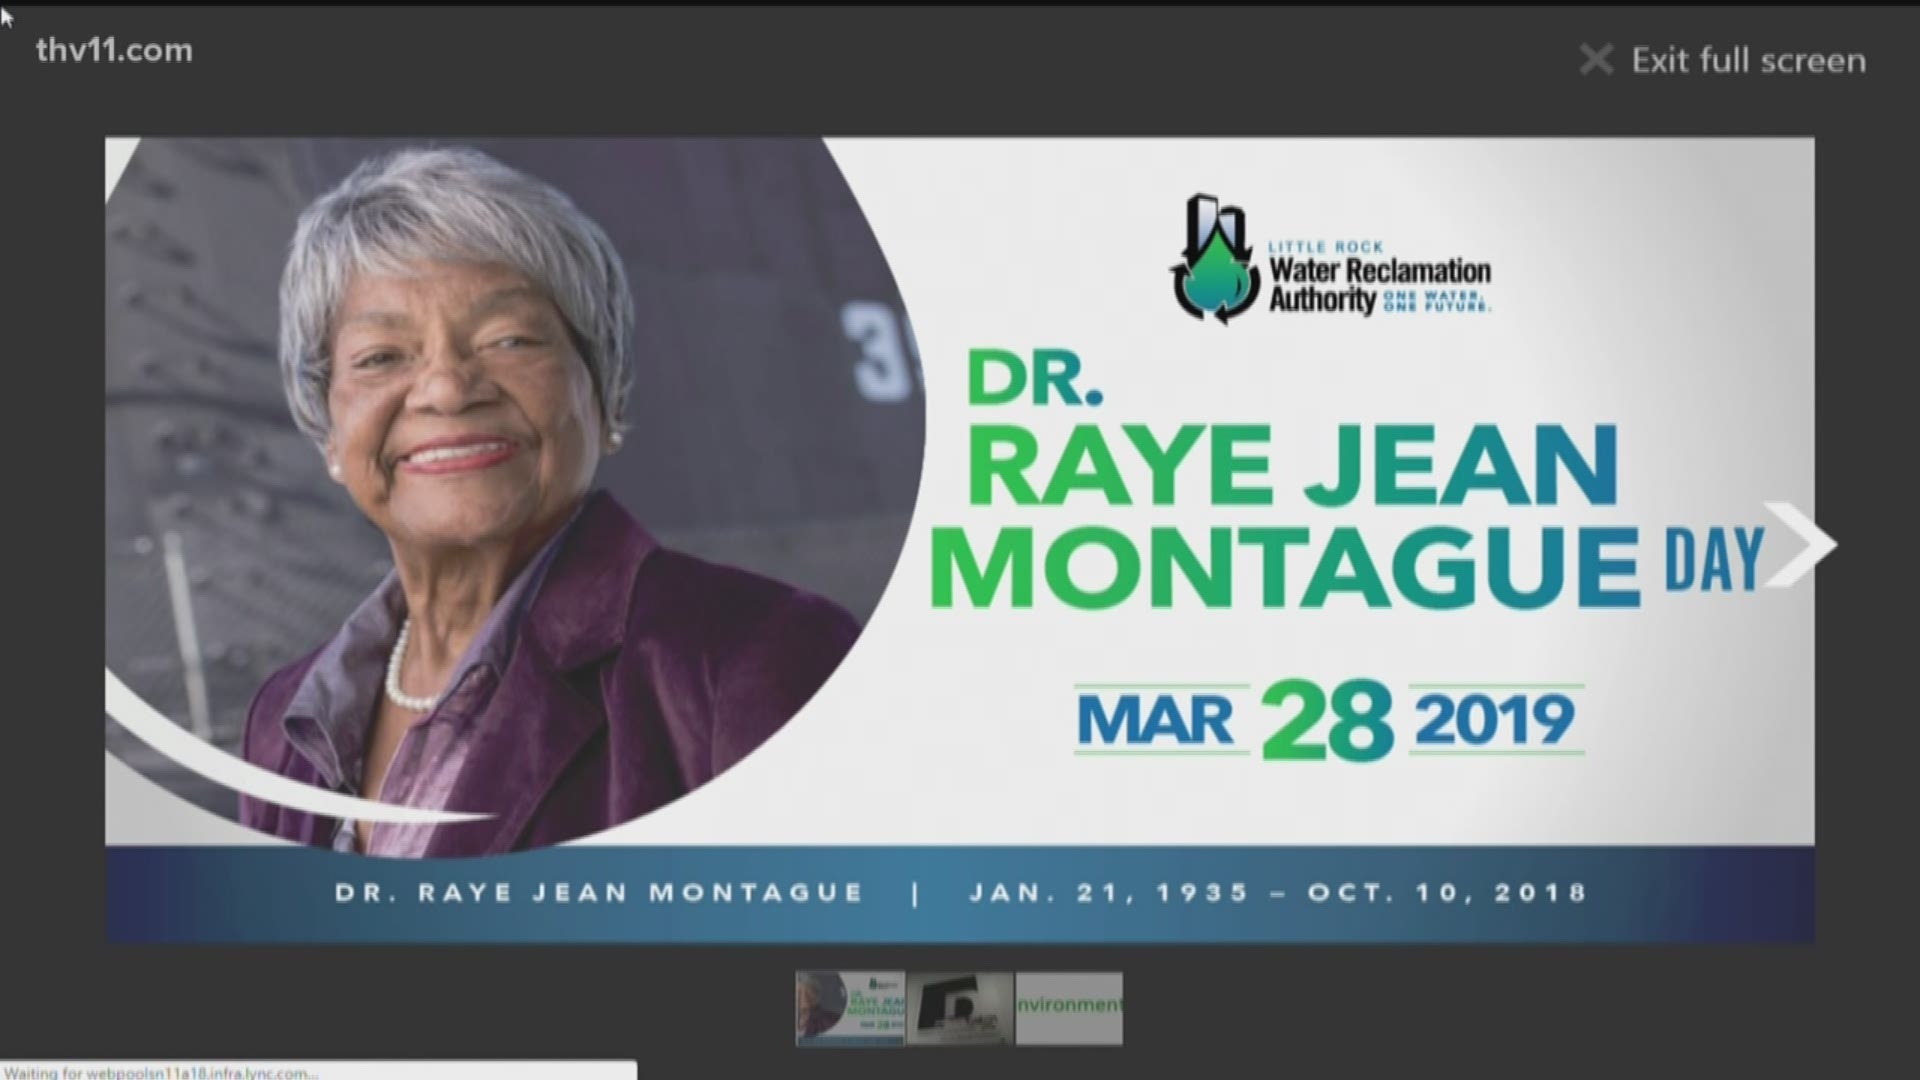 Little Rock Mayor Frank Scott will hold a conference to proclaim March 28 as Raye Montague Day in Little Rock.